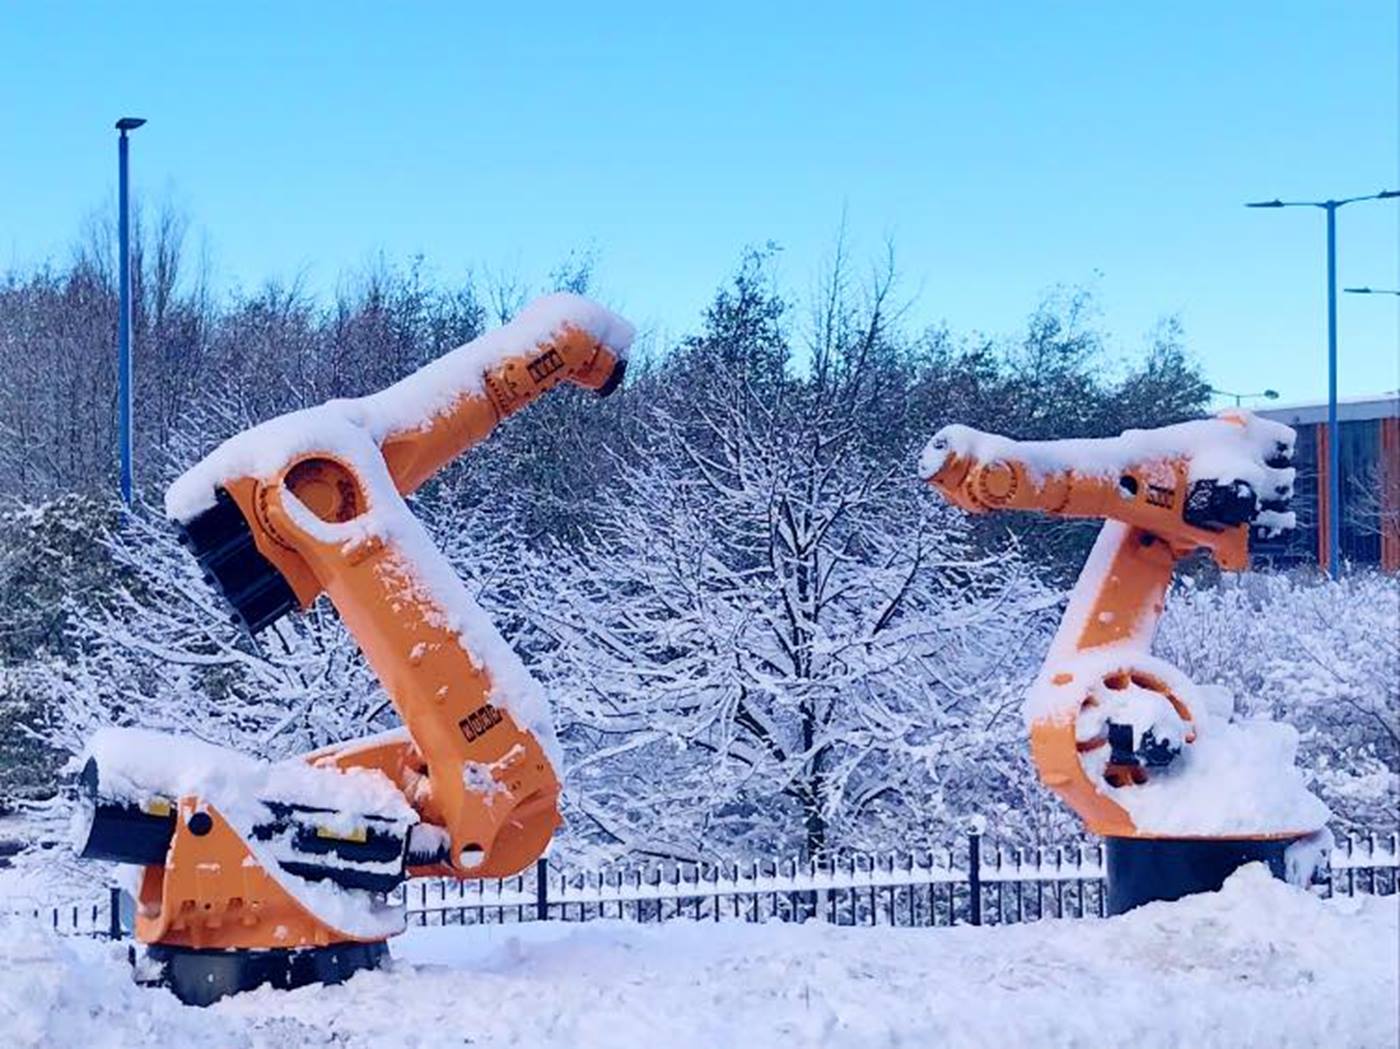 KUKA robots in the snow